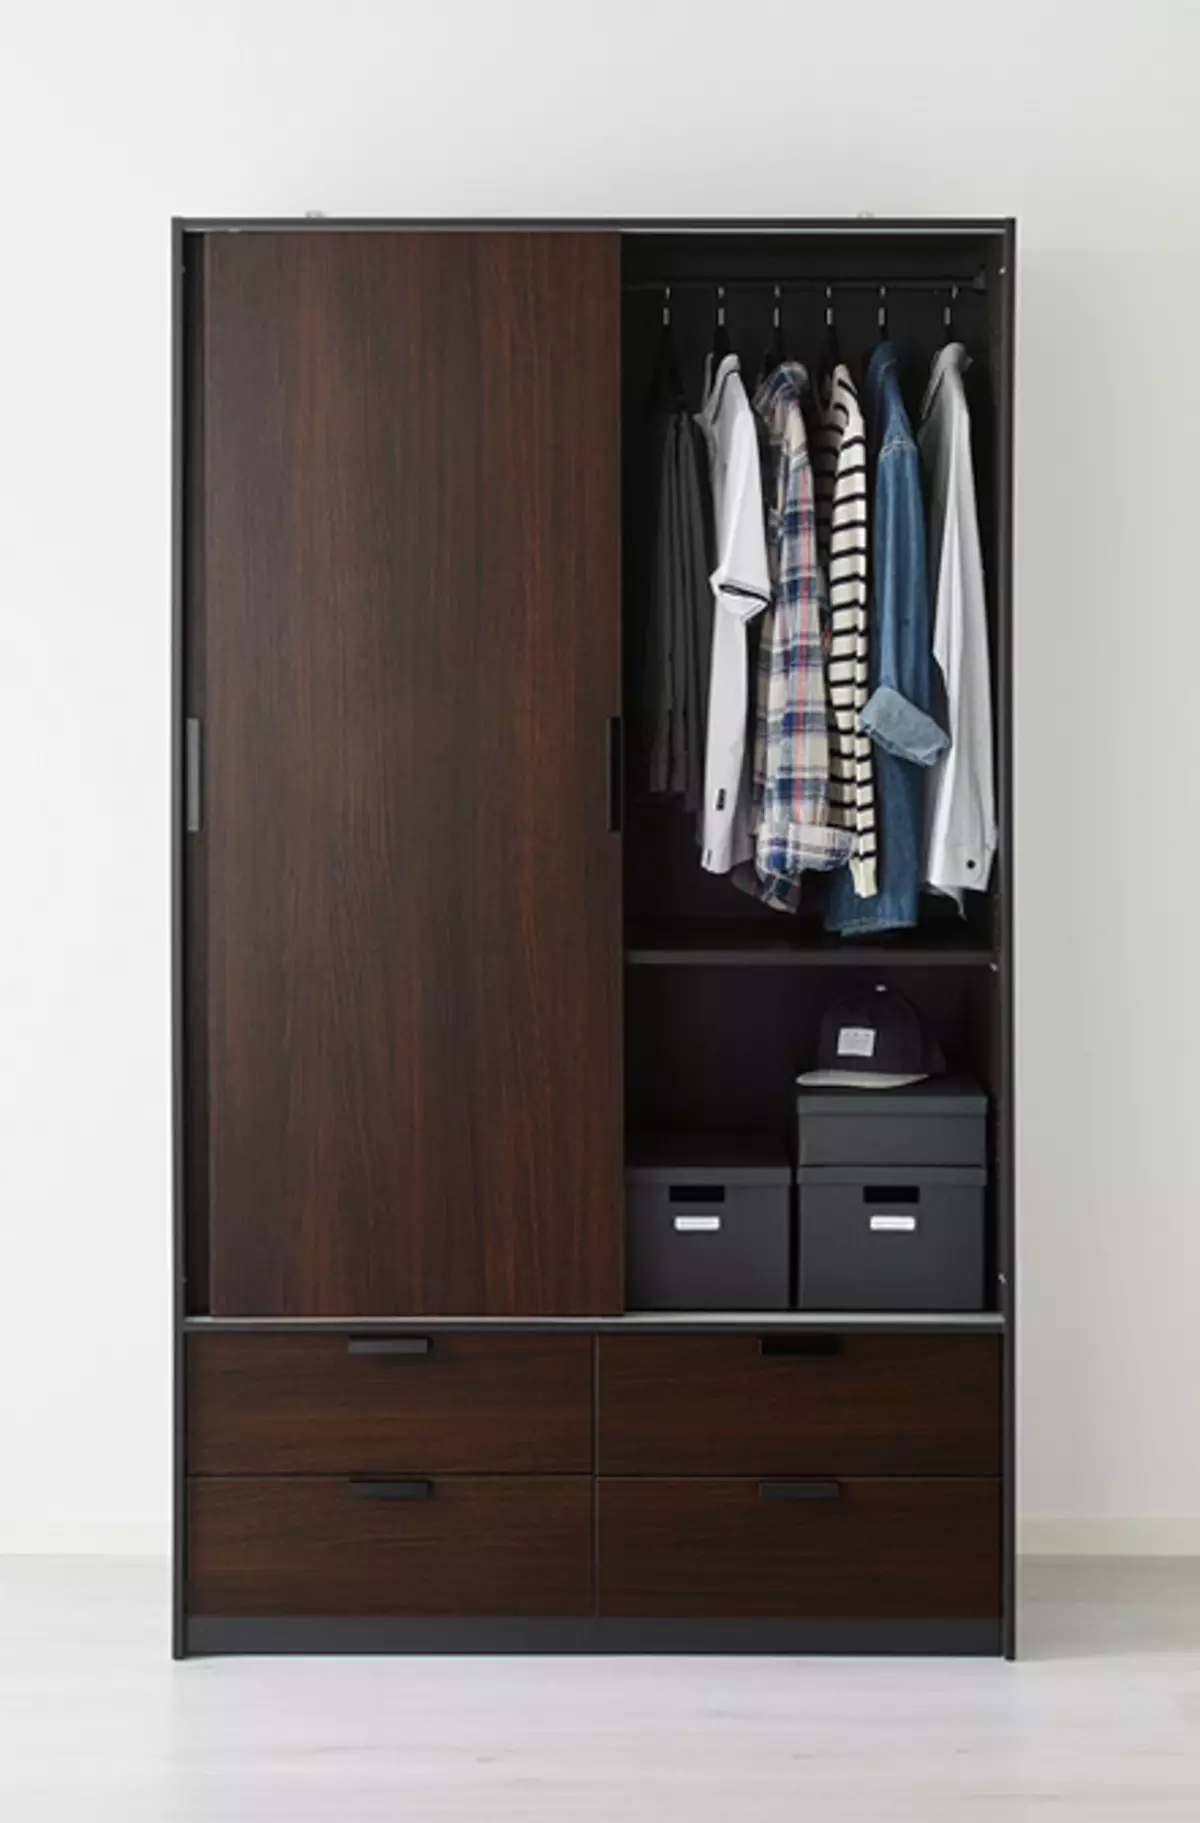 Modern wardrobes in the bedroom: photo and instruction, how to locate them 10044_47